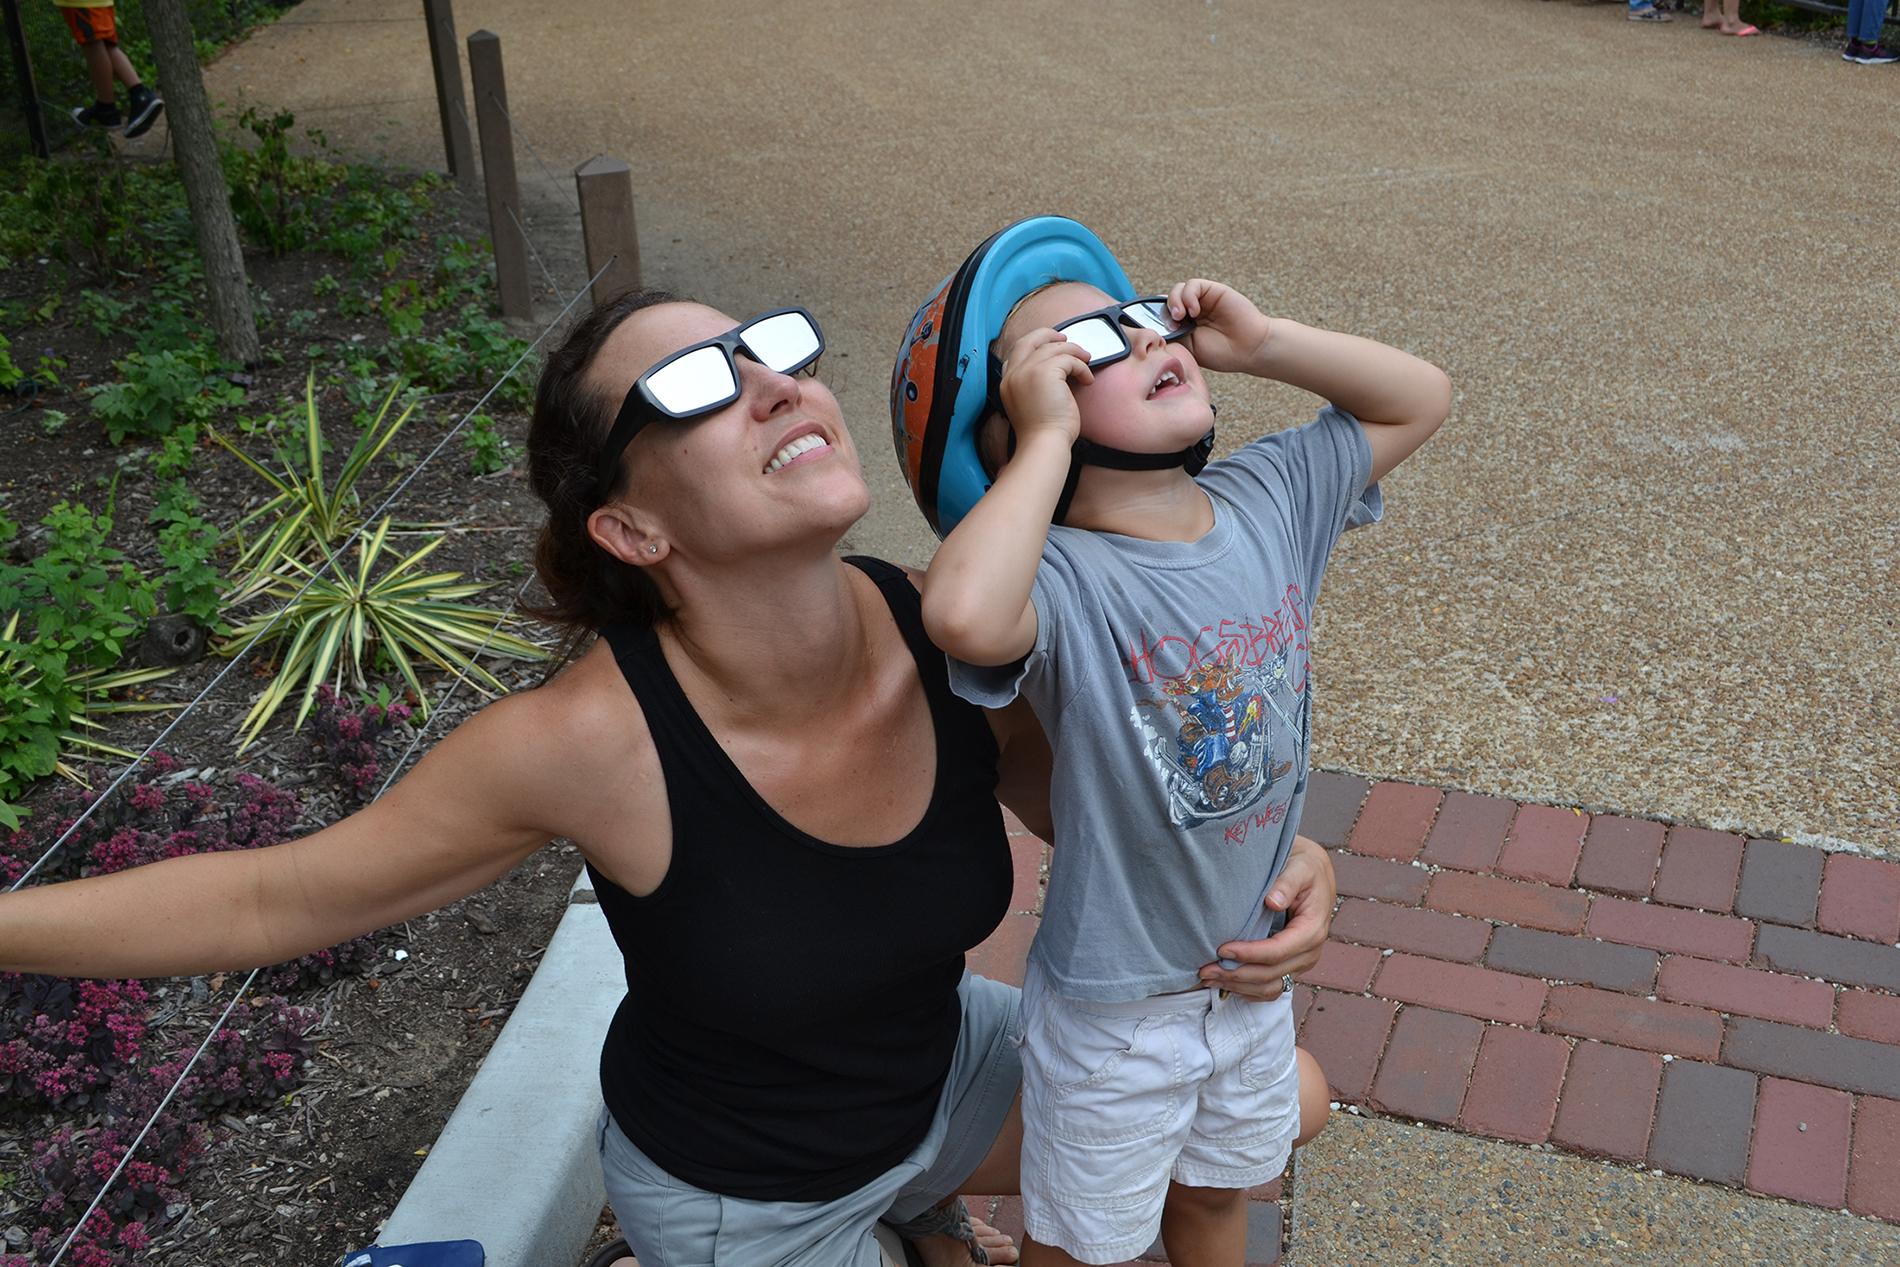 Maria Opdycke and her son, Simm, of Evanston, view the solar eclipse Monday at Lincoln Park Zoo. (Photos by Alex Ruppenthal / Chicago Tonight)